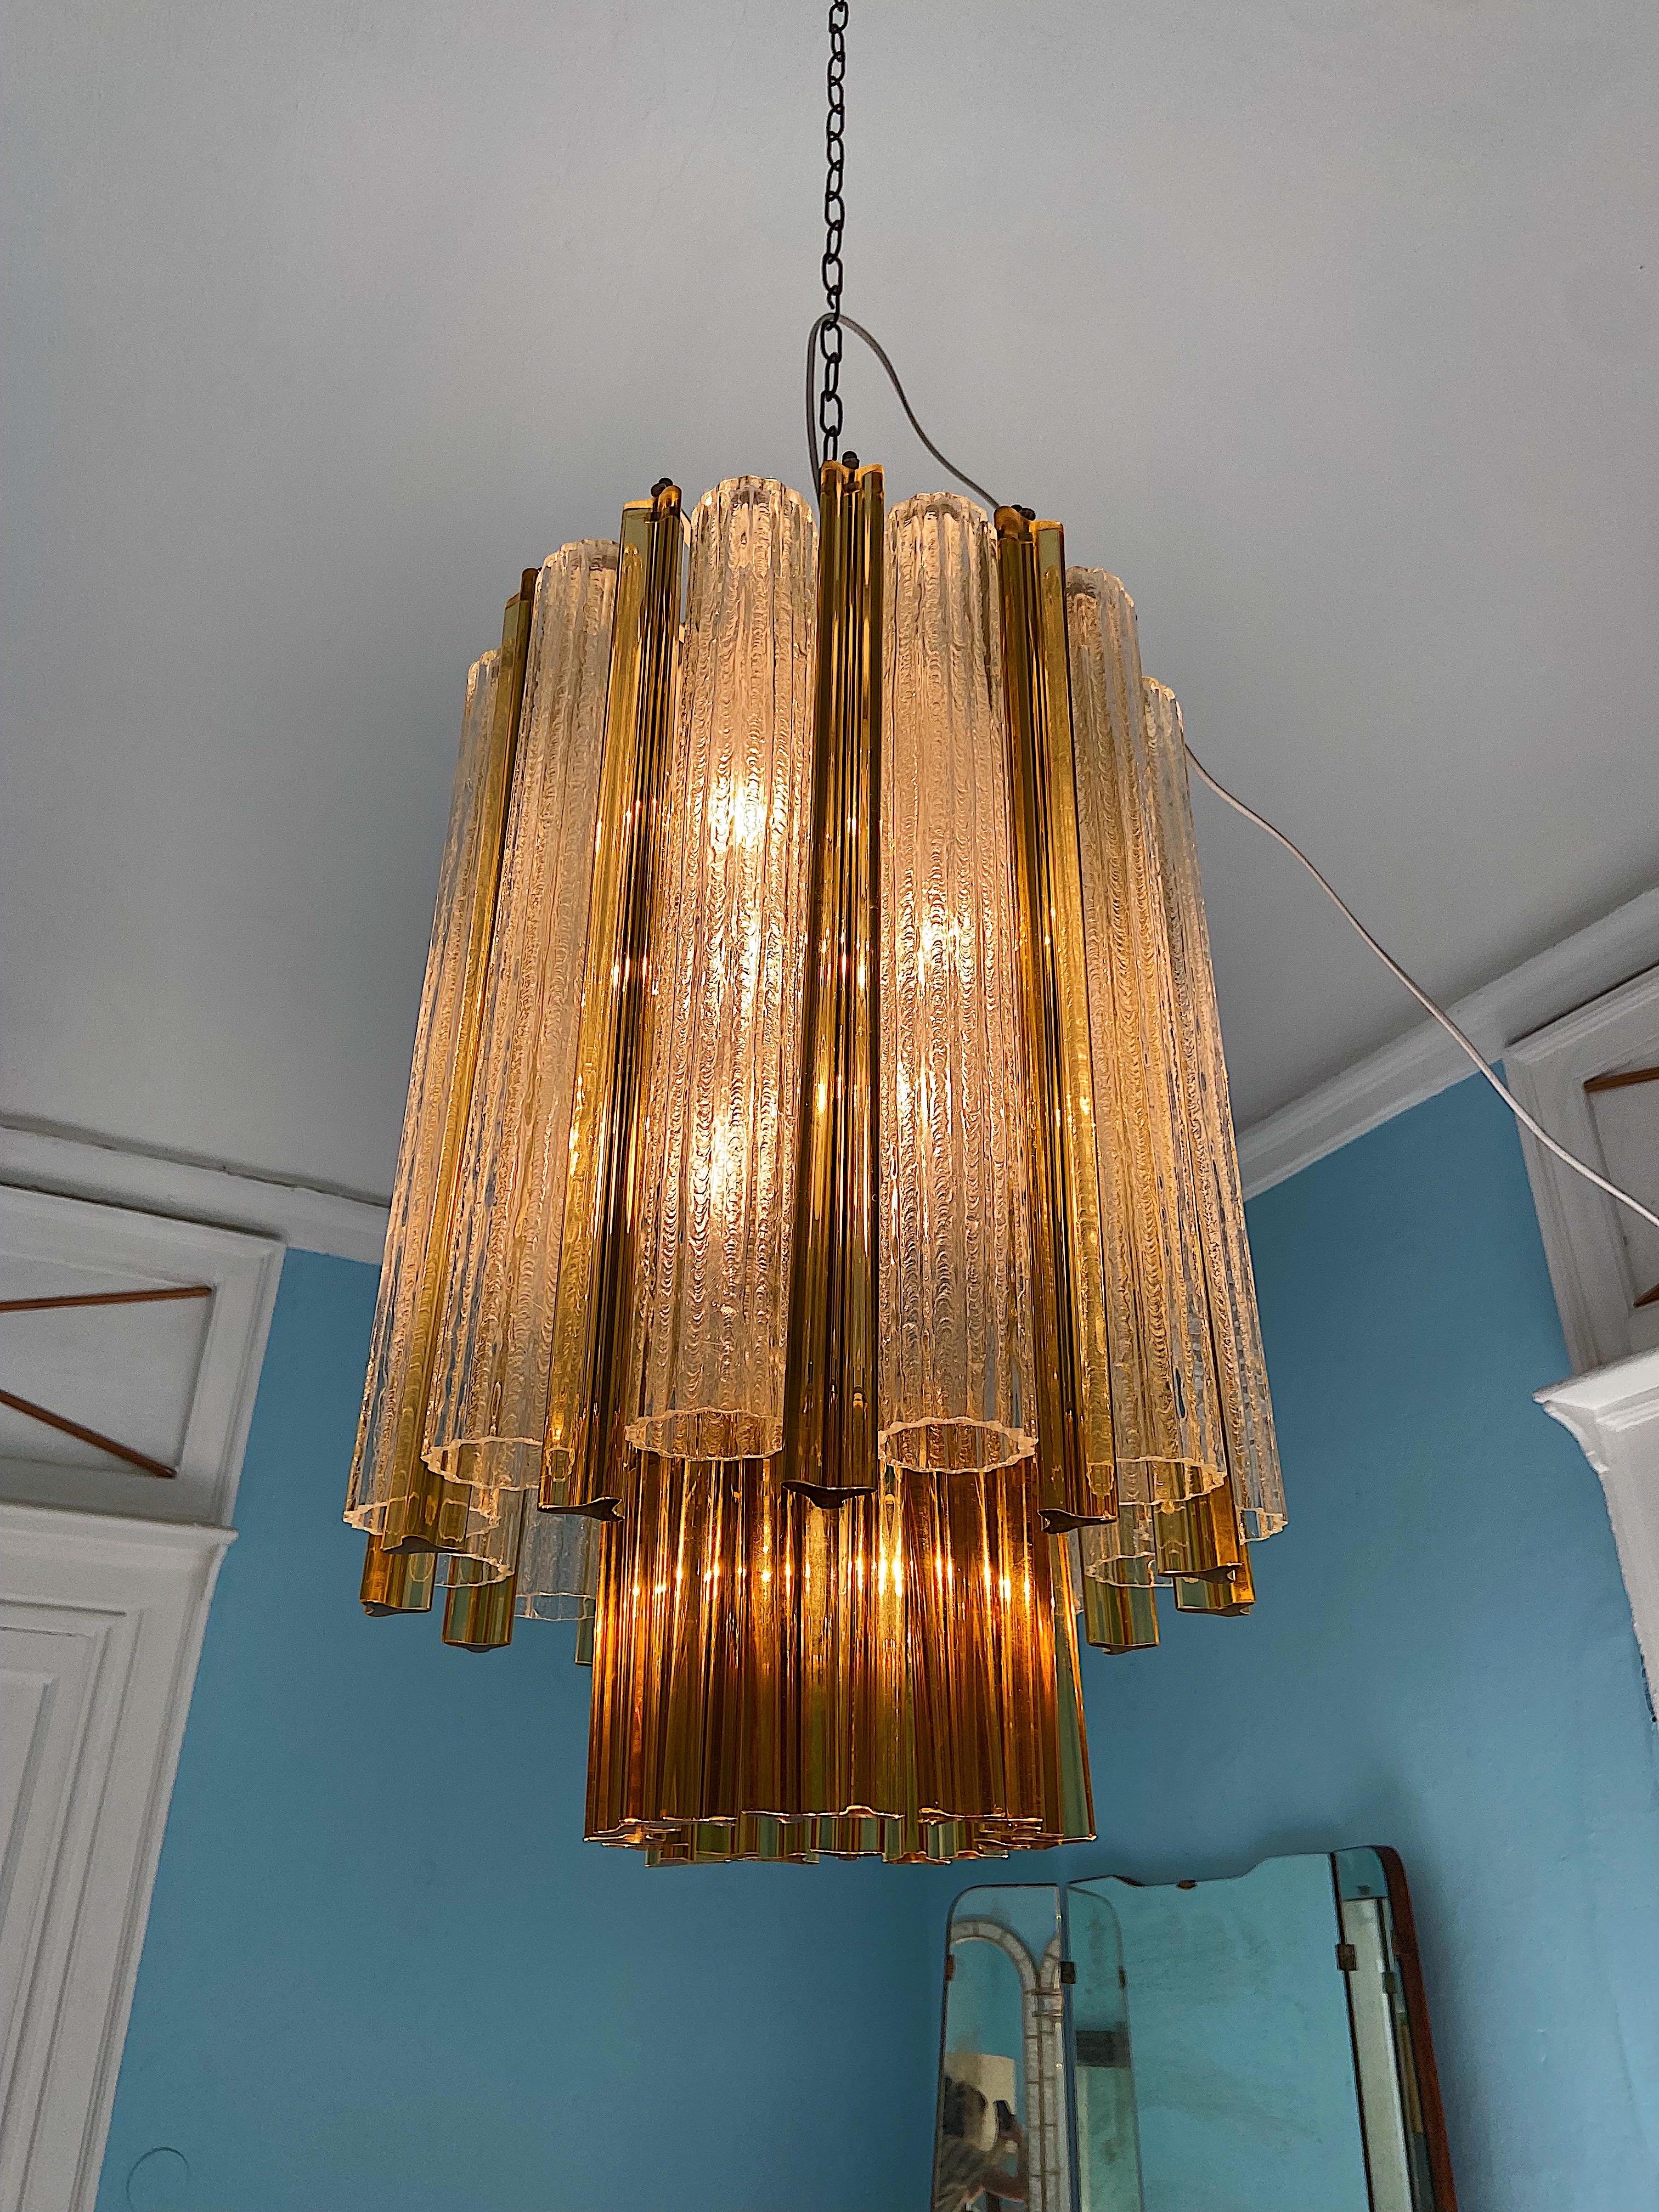 Mid-Century Modern chandelier by Venini. 42 Murano glasses set on a metal base consisting of 2 tiers.
The light has 7 bulbs. 

Details
Creator: Venini, Murano
Dimensions: Height without chain 60 cm Diameter: 40 cm. 
Materials and Techniques: